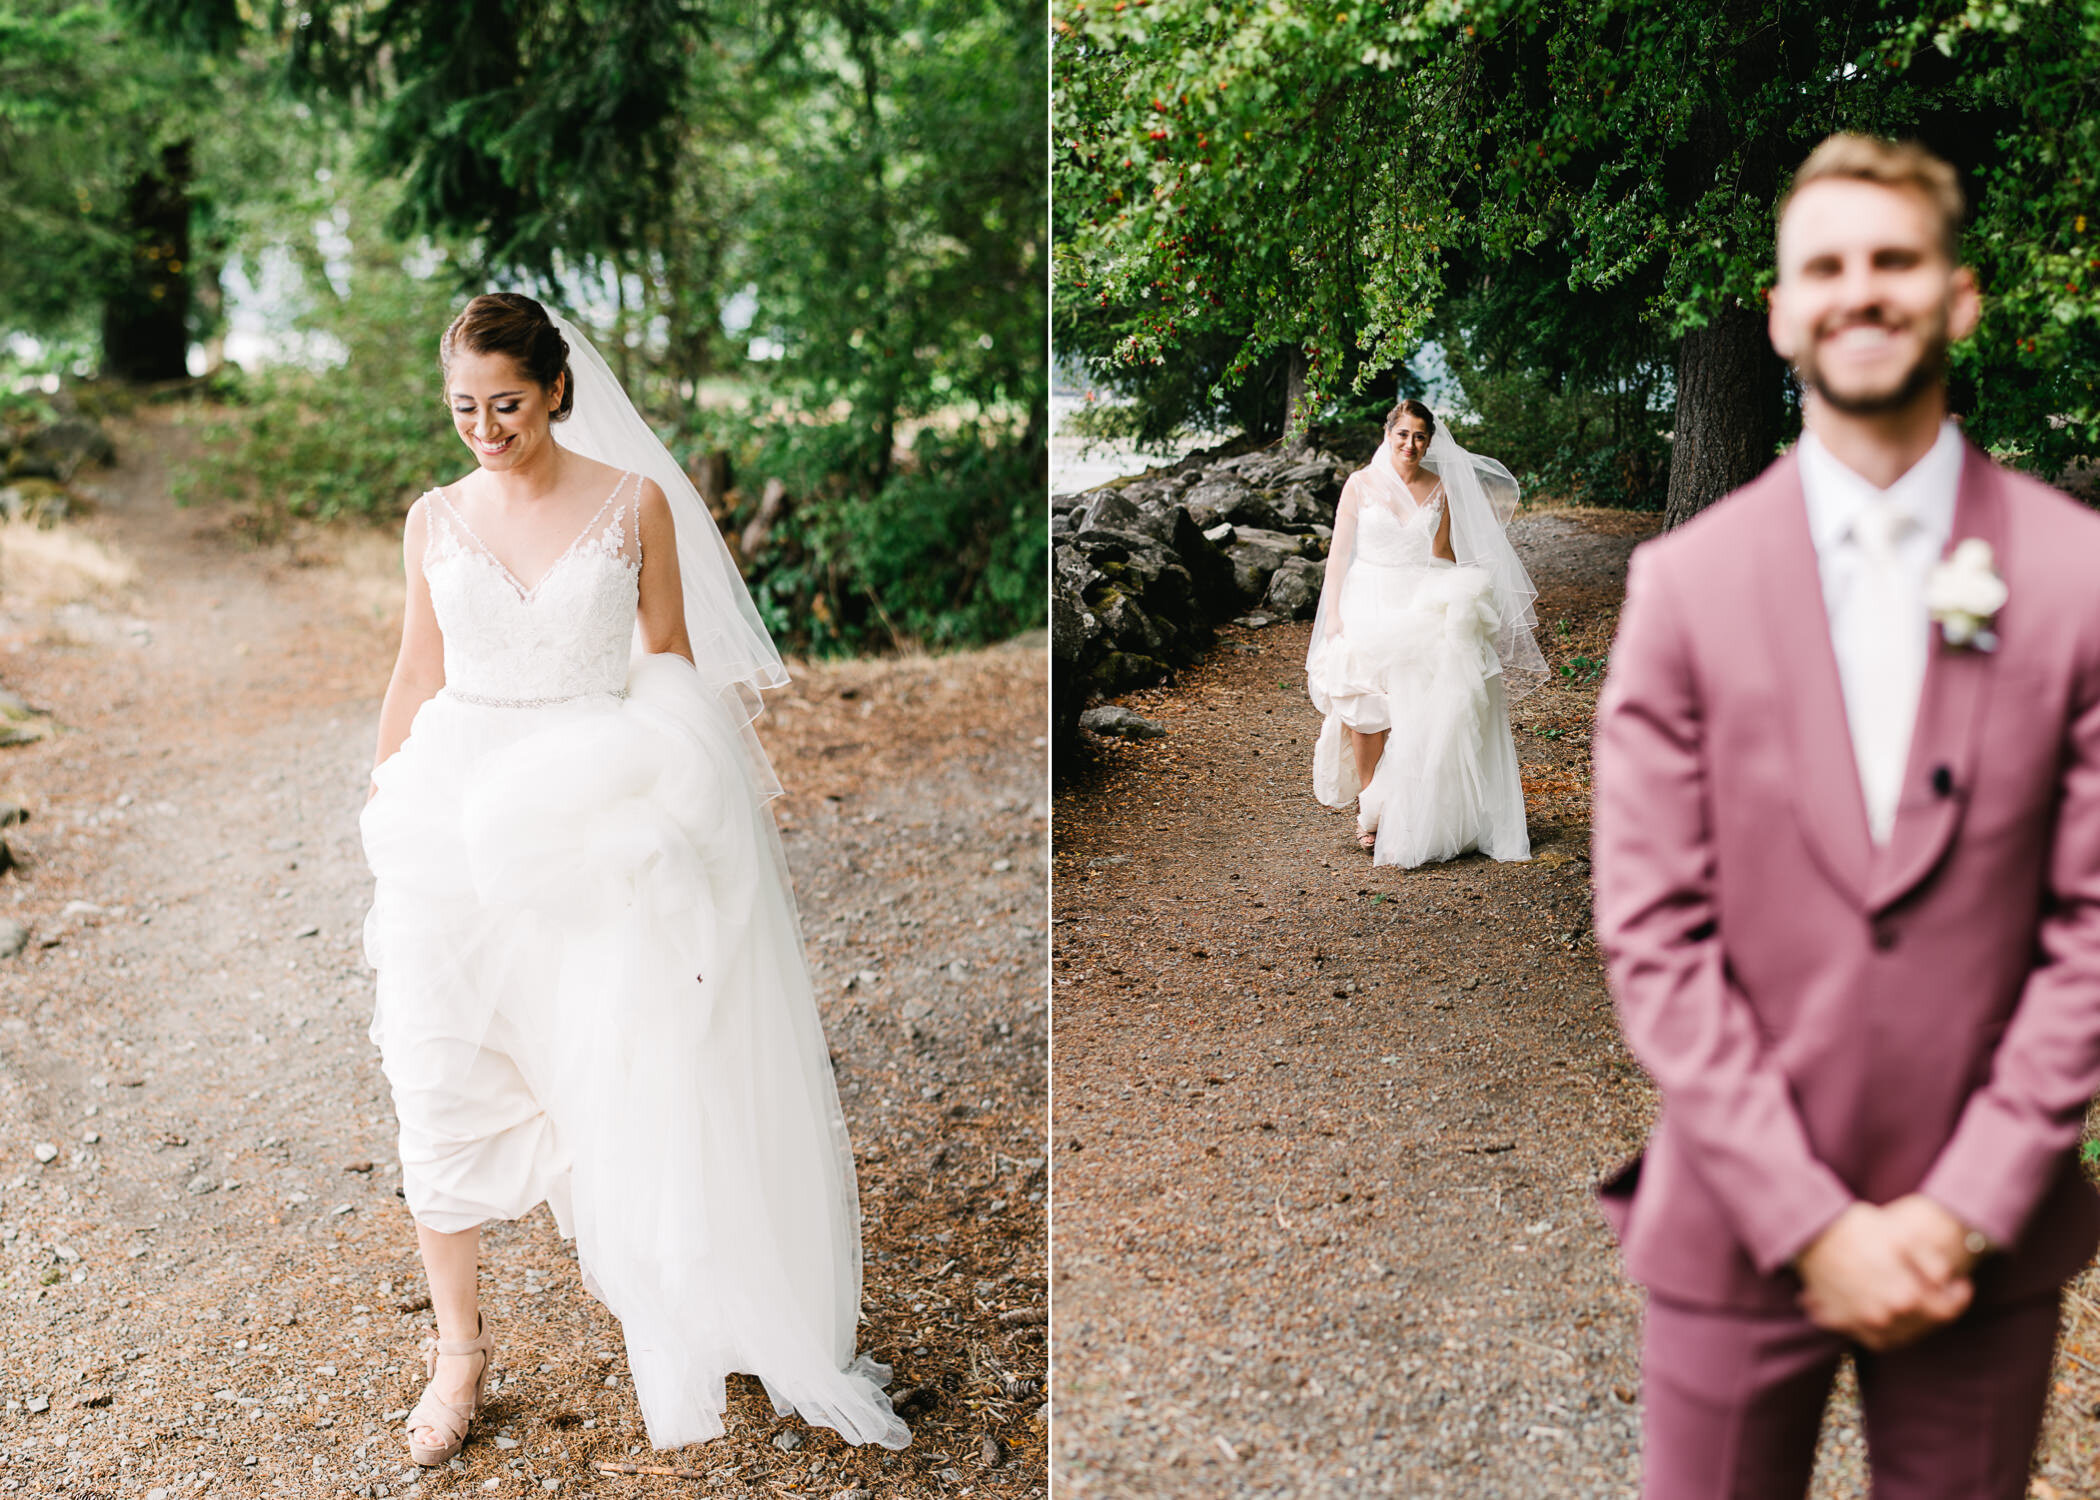  Bride walks with dress bundled up during first look moment 